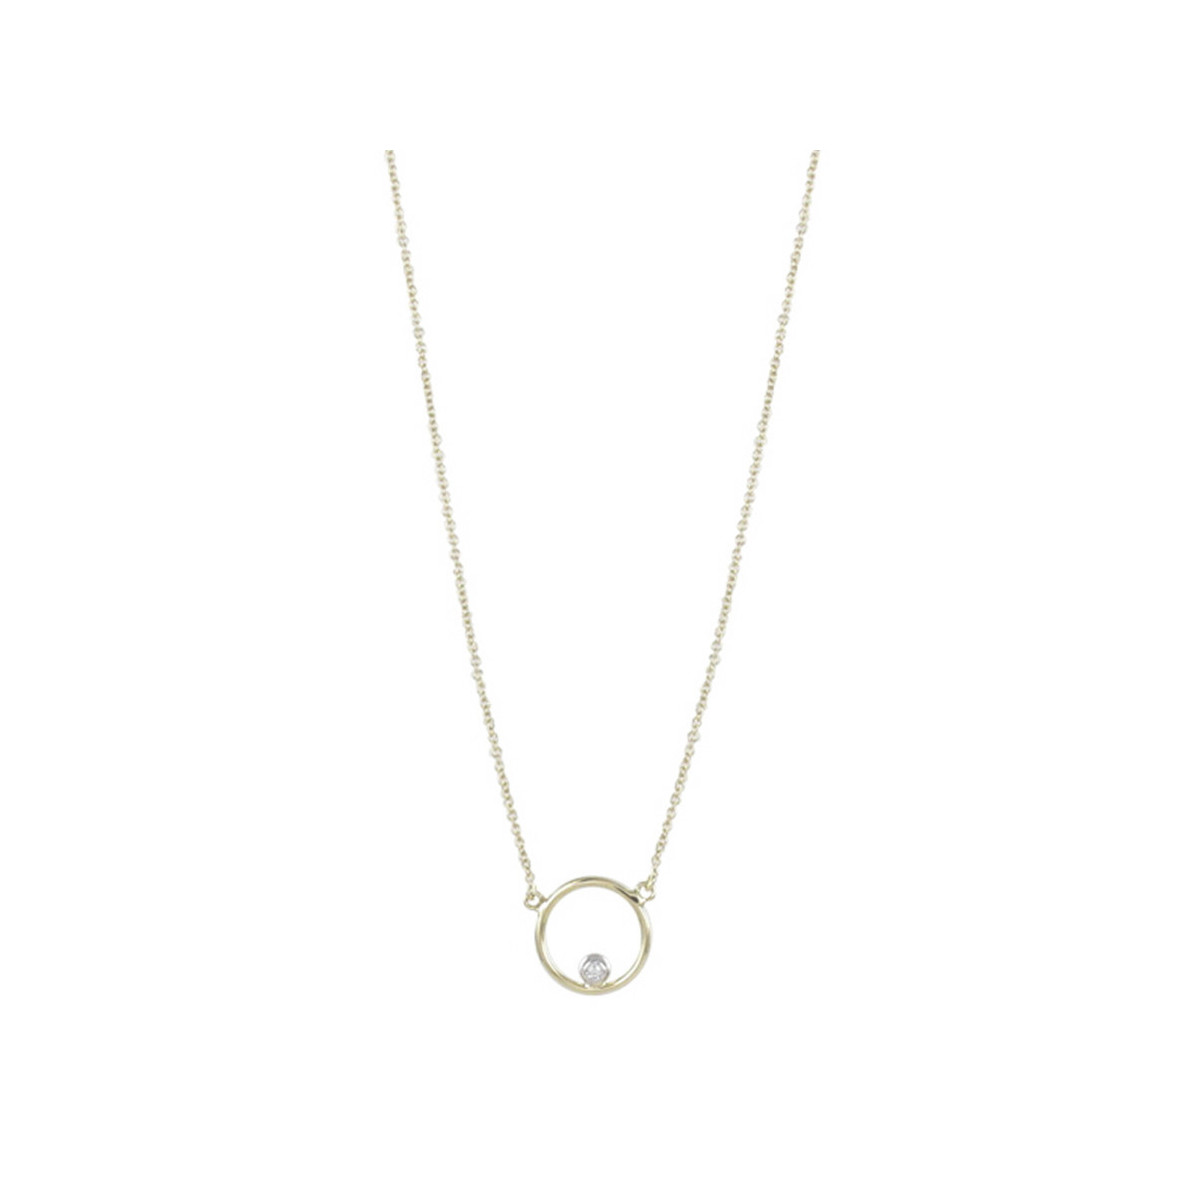 YELLOW GOLD AND SMALL DIAMOND NECKLACE